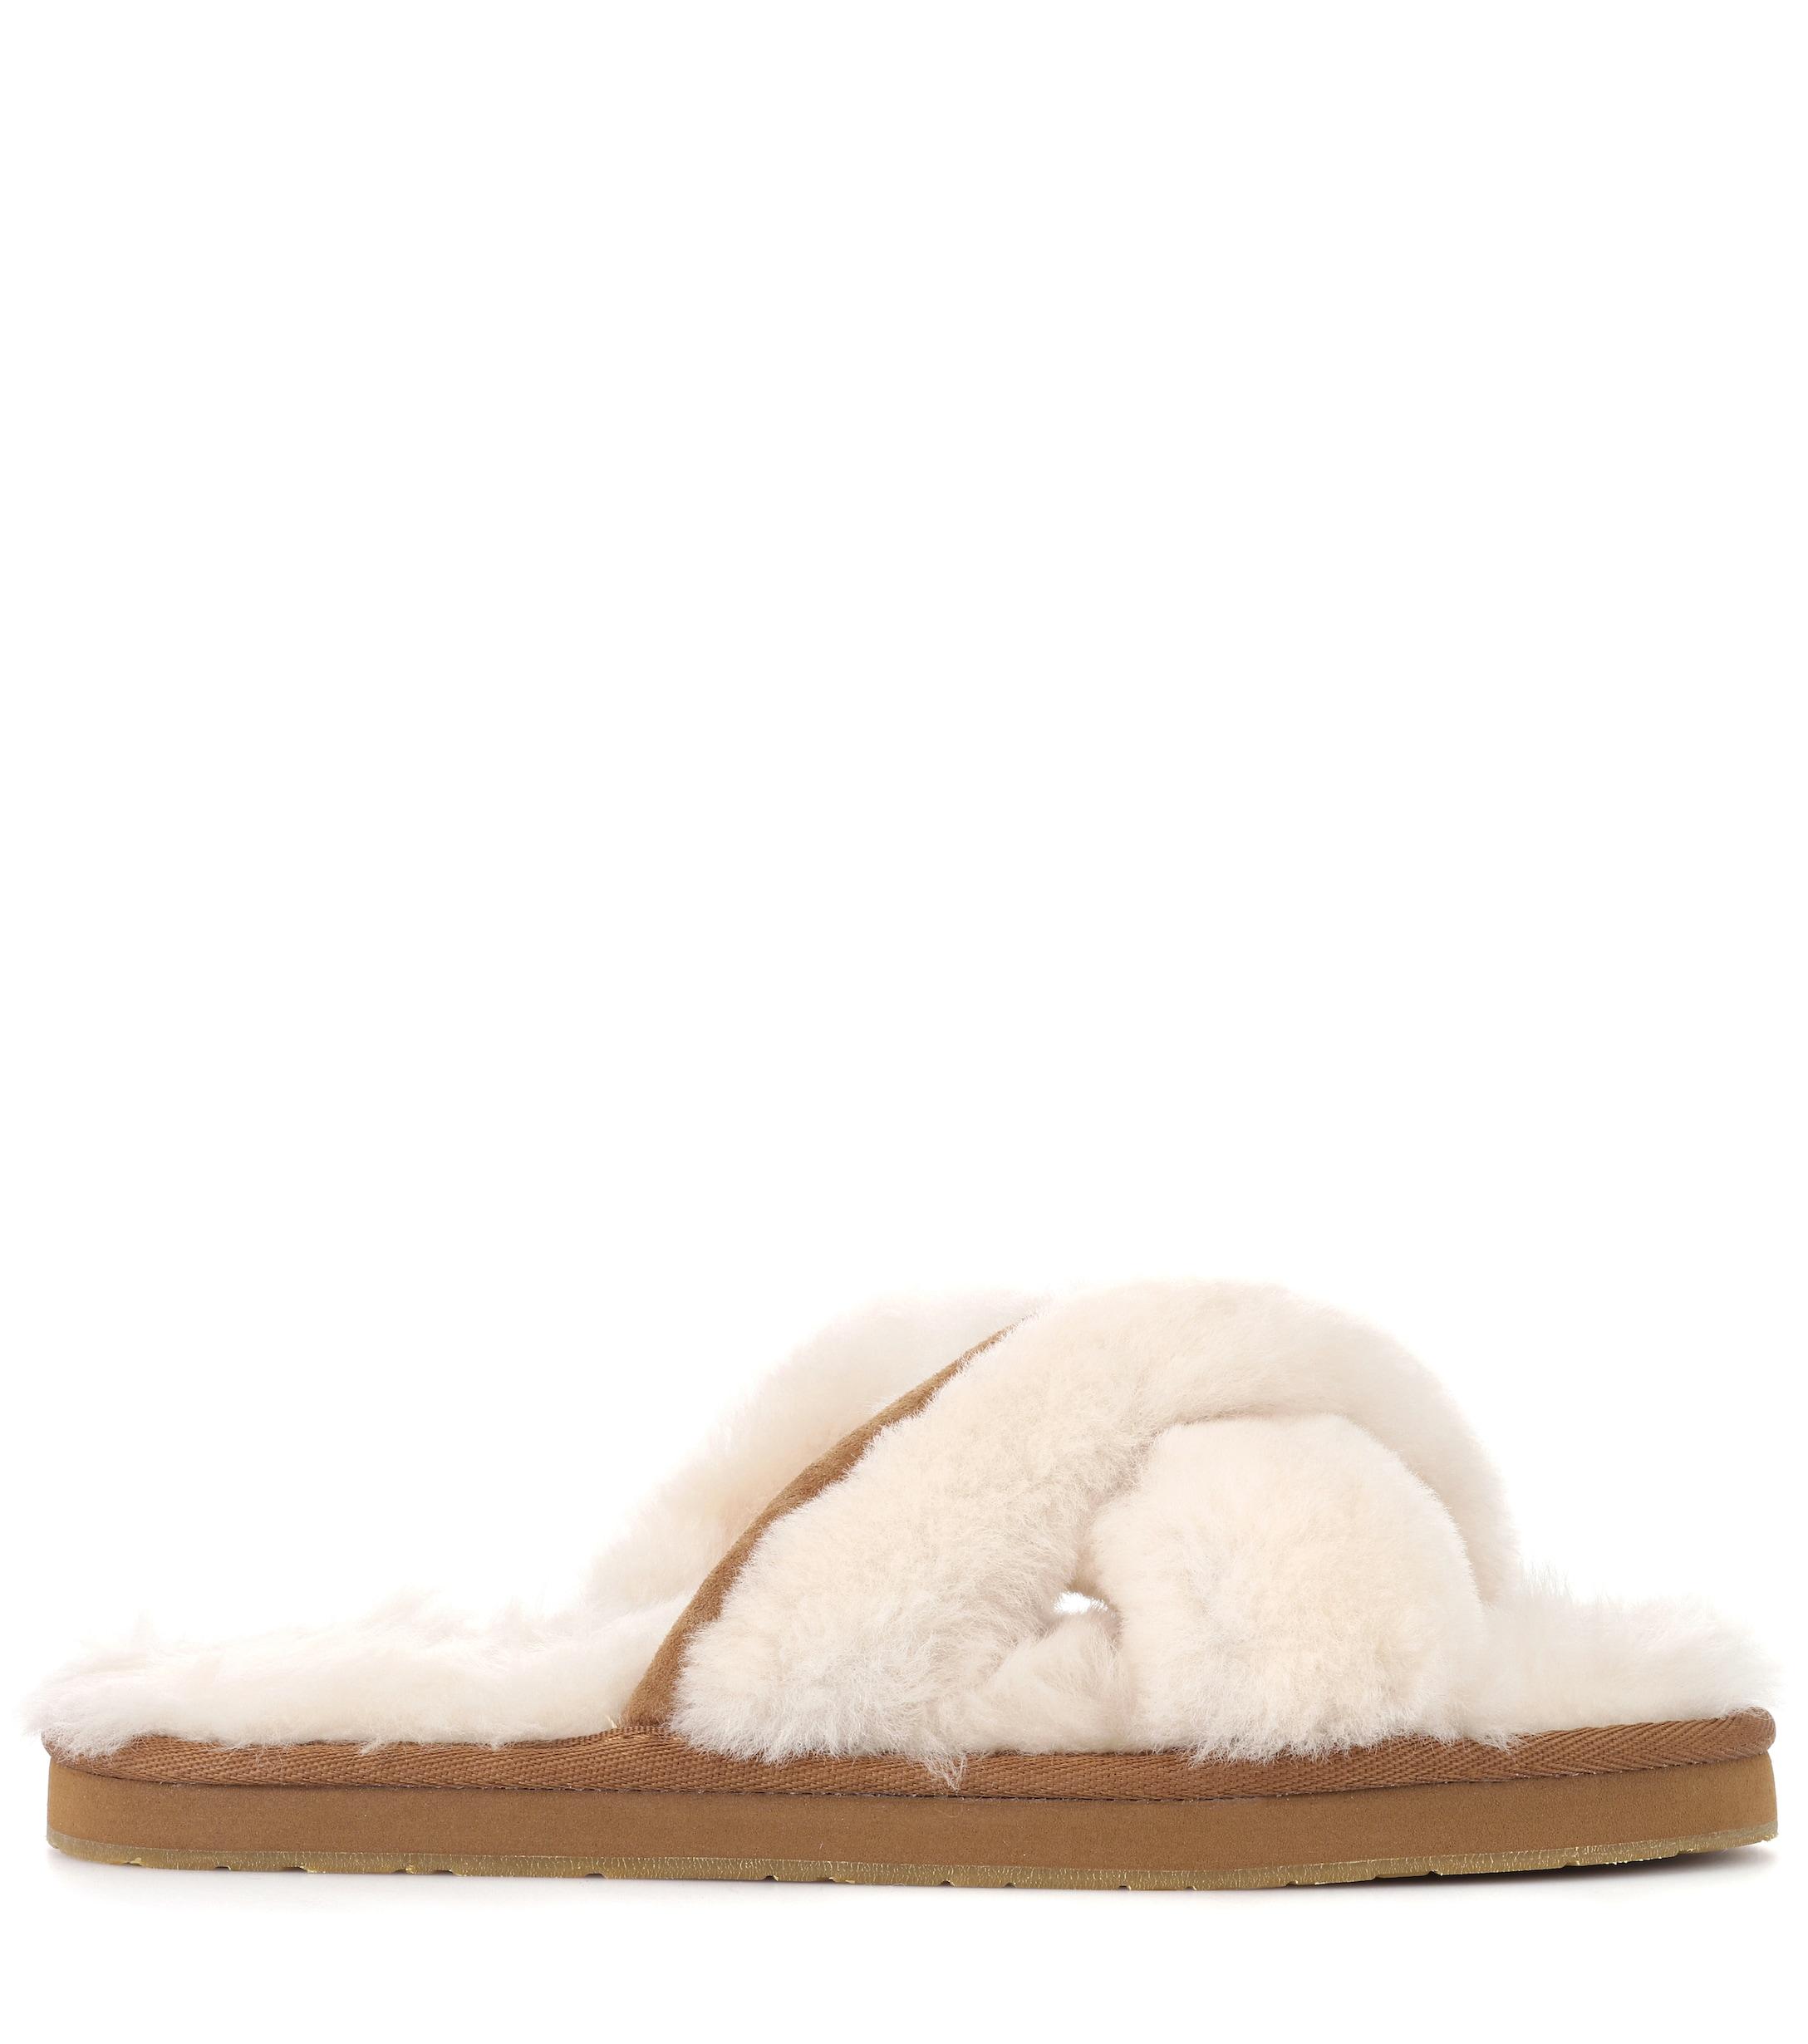 UGG Abela Shearling Slippers in Beige (Natural) - Lyst